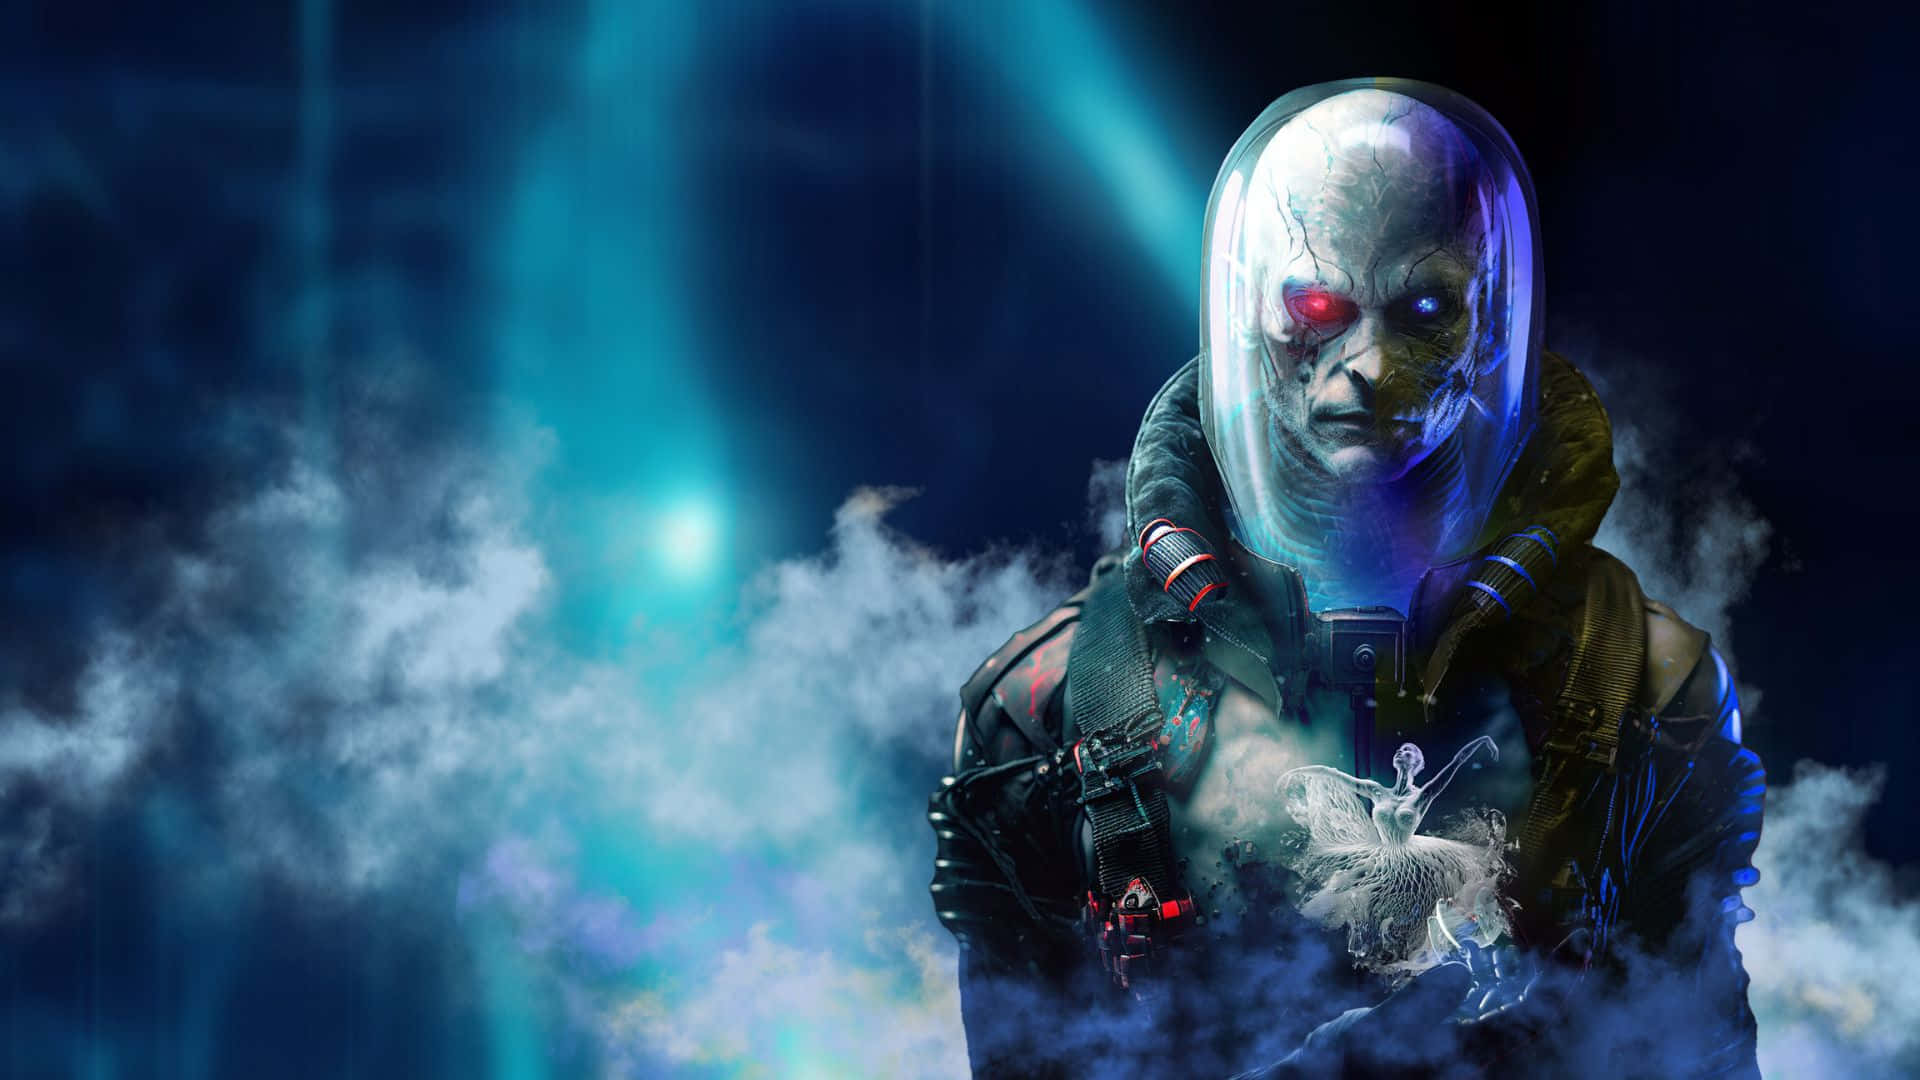 Mr. Freeze Chilling in Action Wallpaper